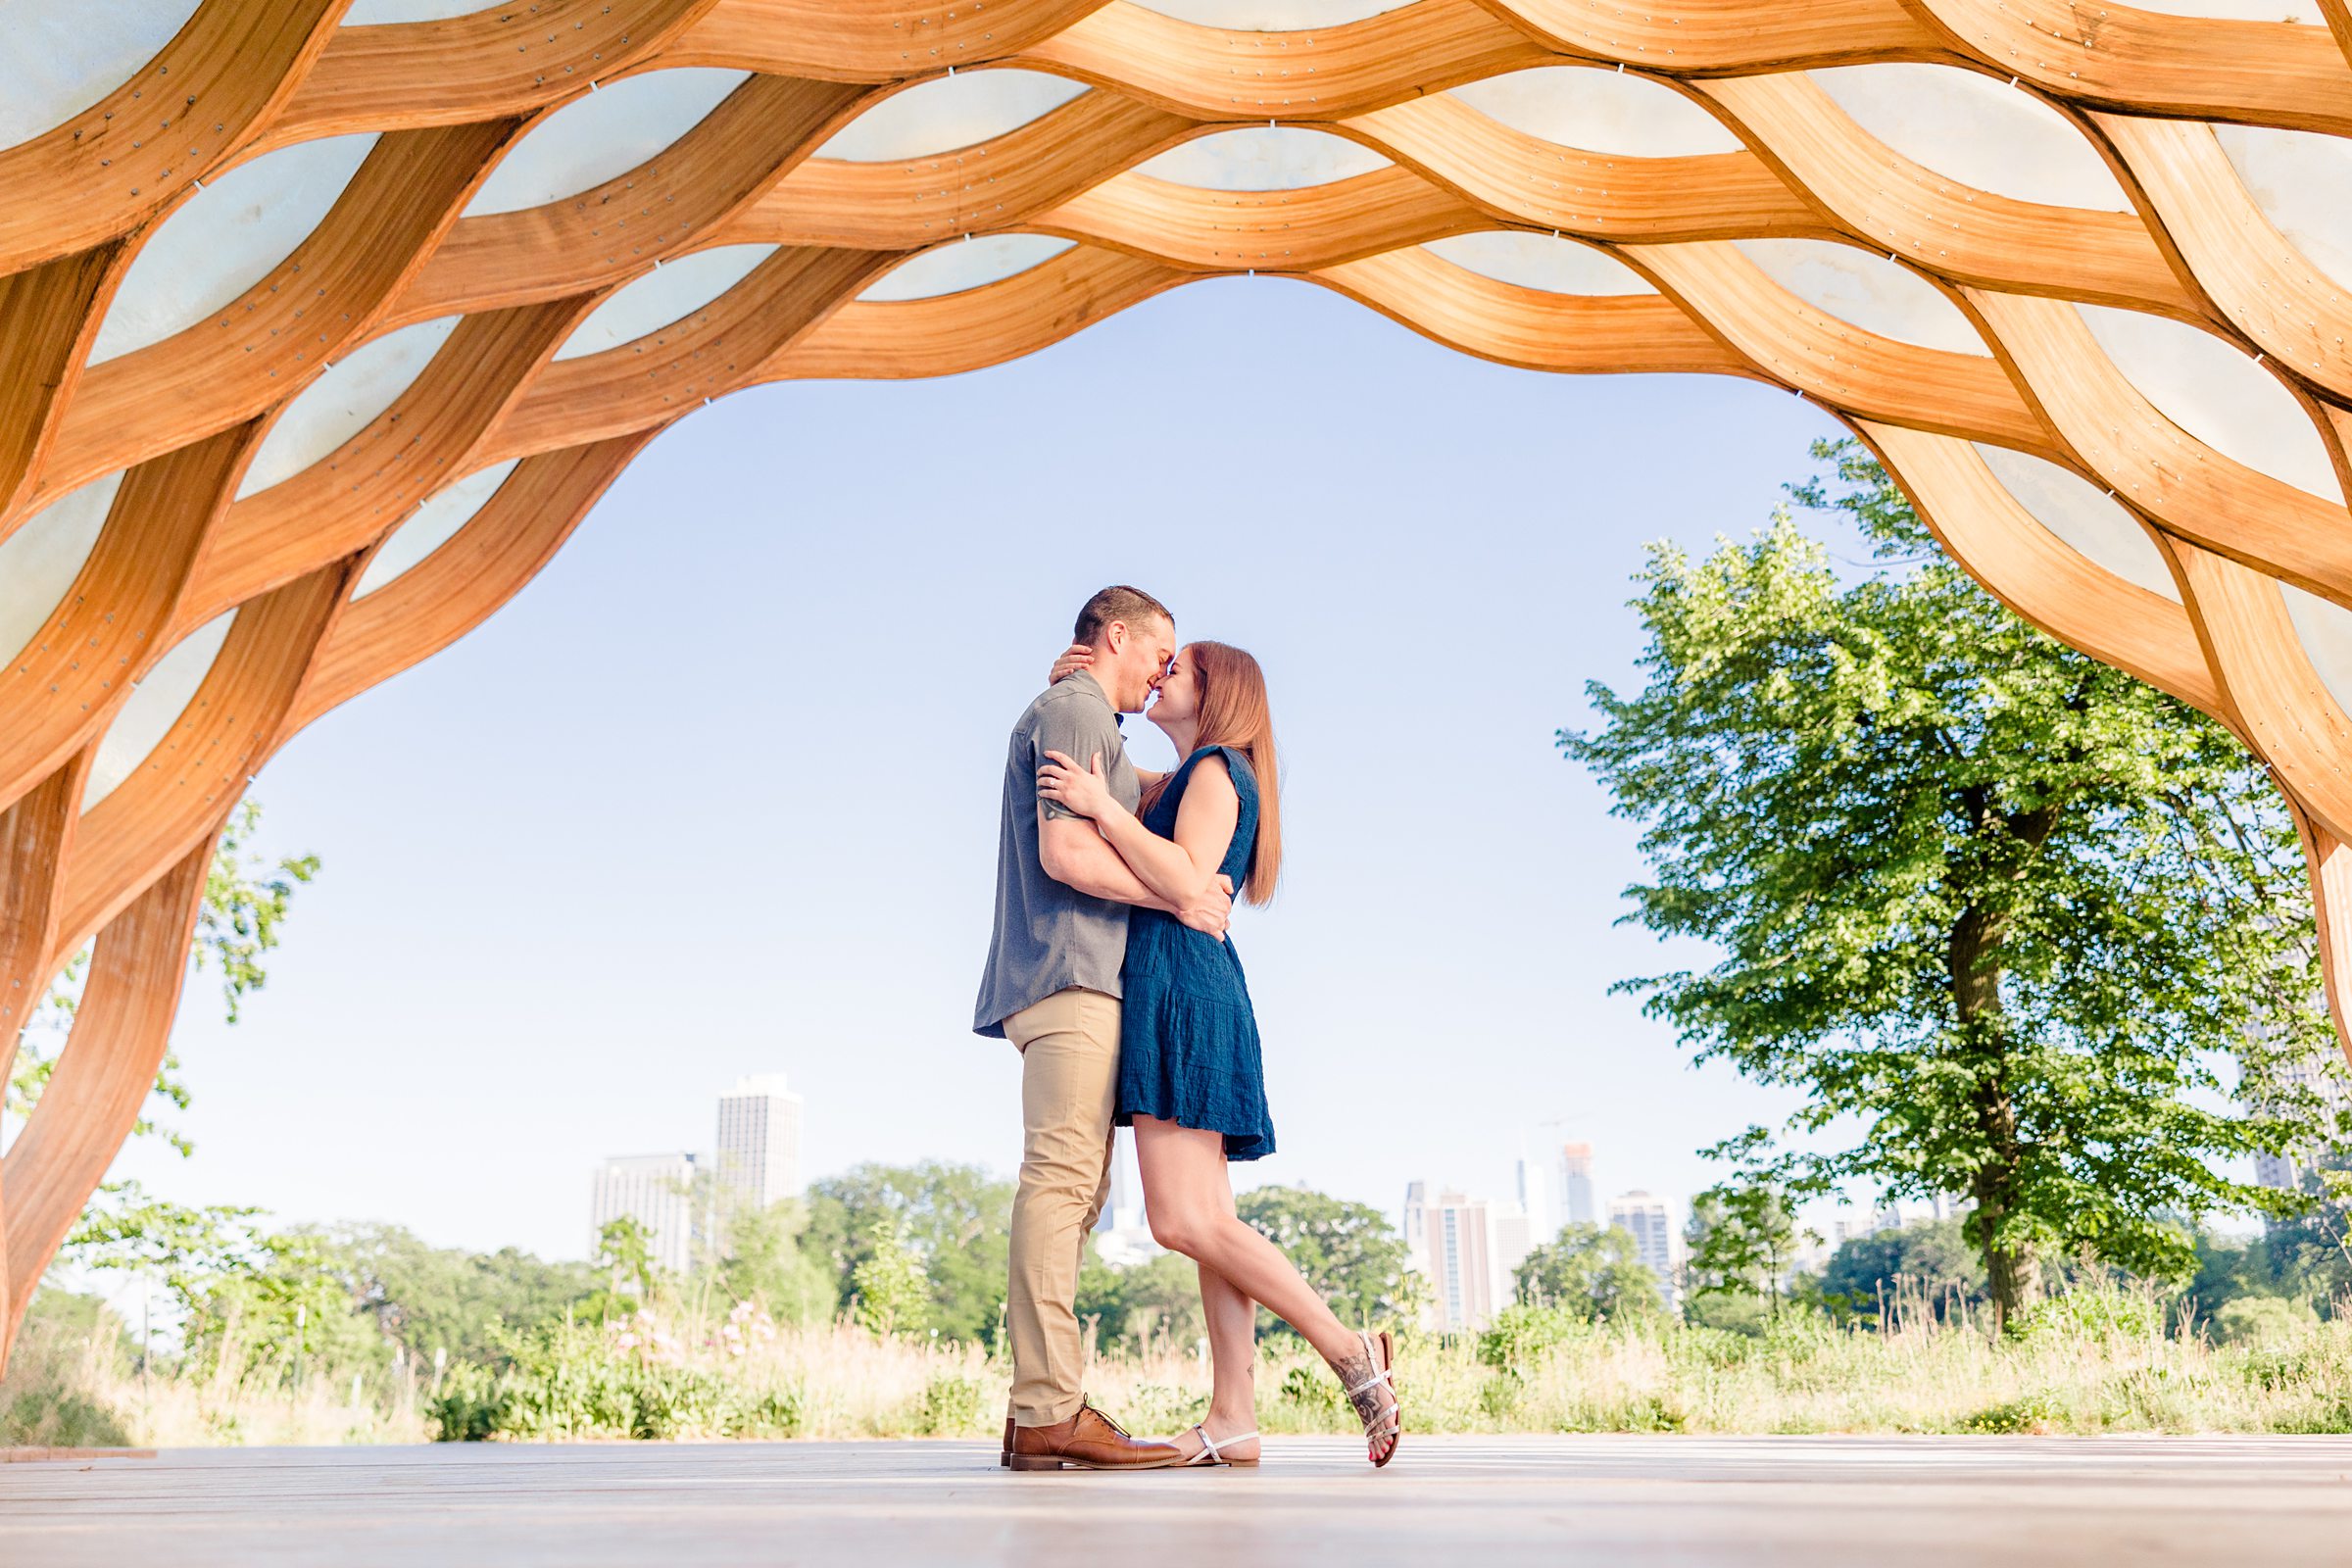 Couple celebrate their engagement at Lincoln Park in Chicago, Illinois. Photograph taken by Illinois Wedding Photographers, Joanna and Brett Photography